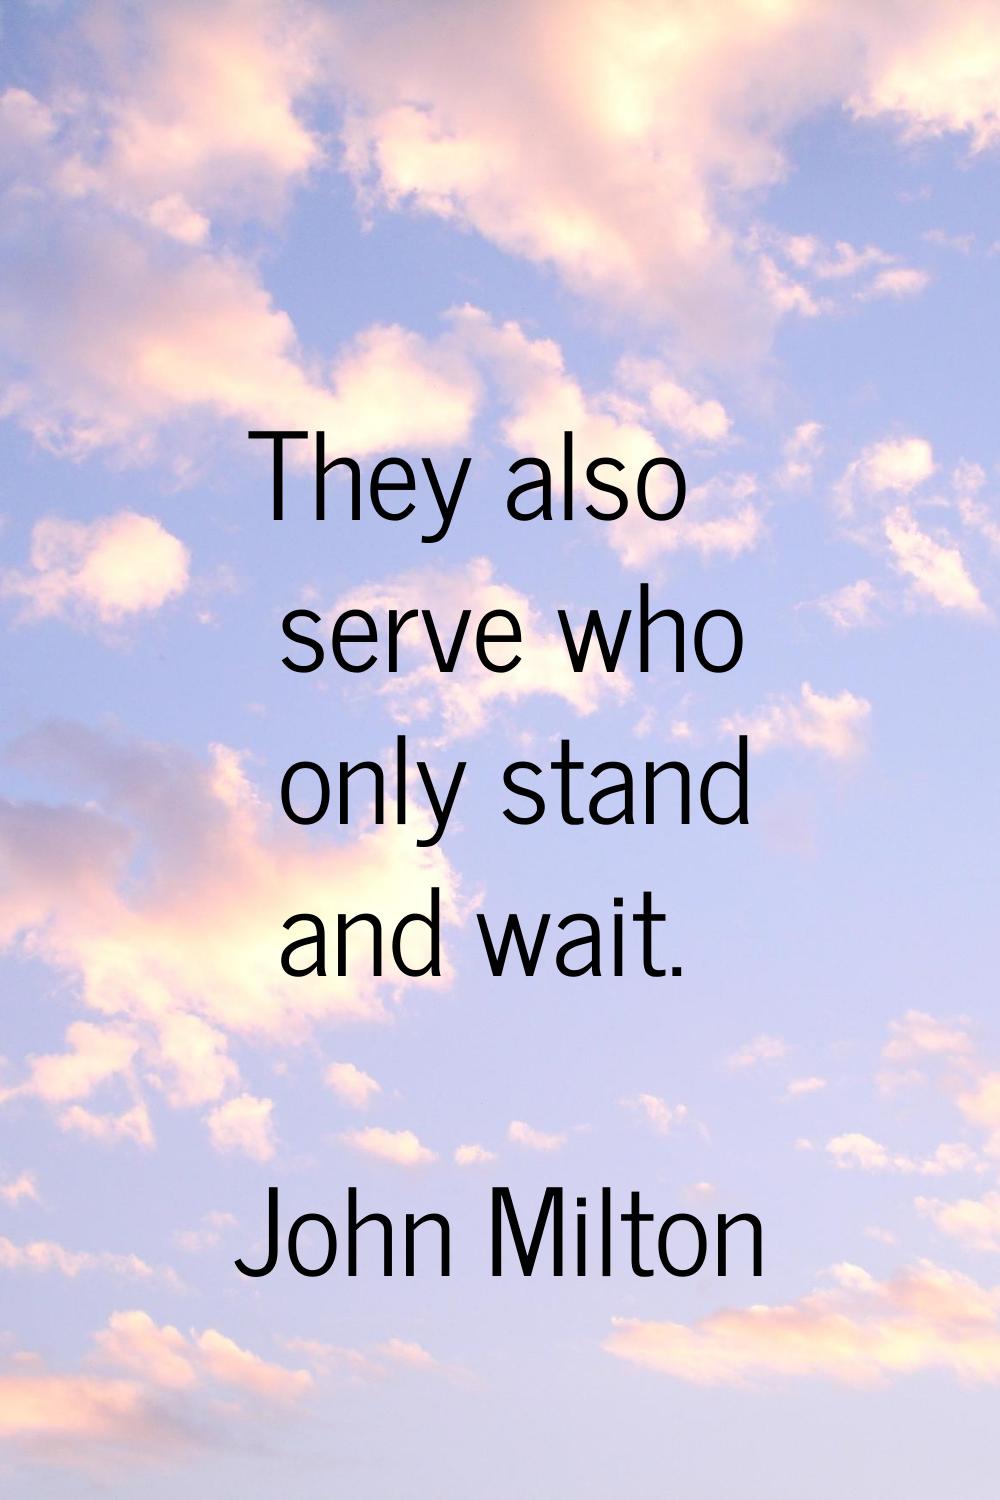 They also serve who only stand and wait.